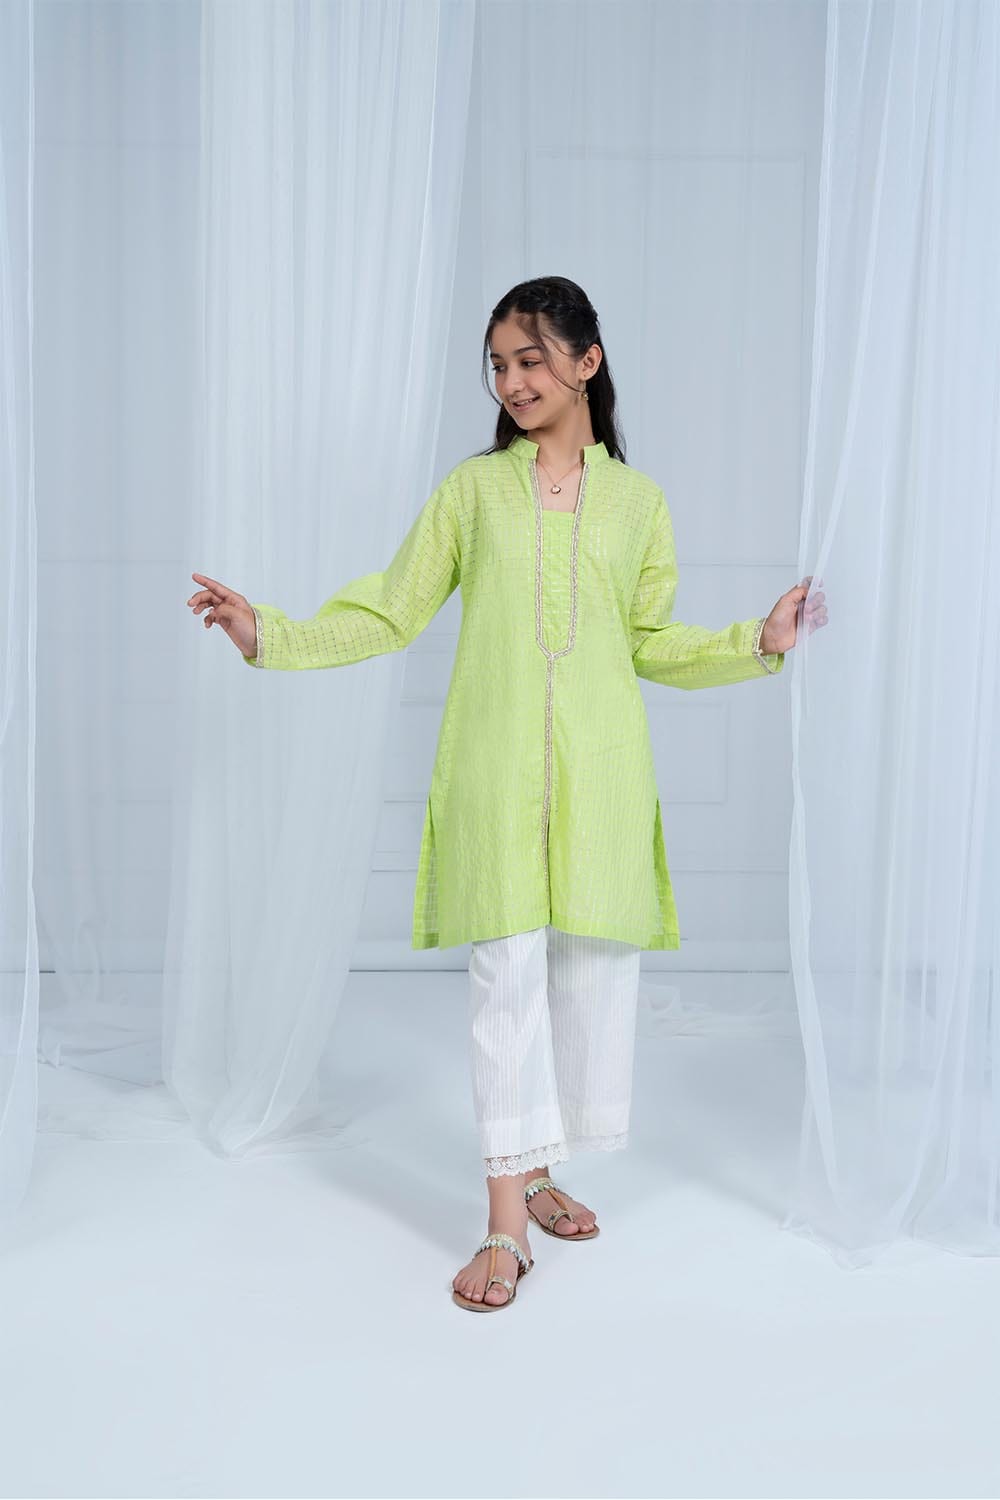 Hope Not Out by Shahid Afridi Eastern Girls Shirts Girl Flora Neonlime Green Shirt